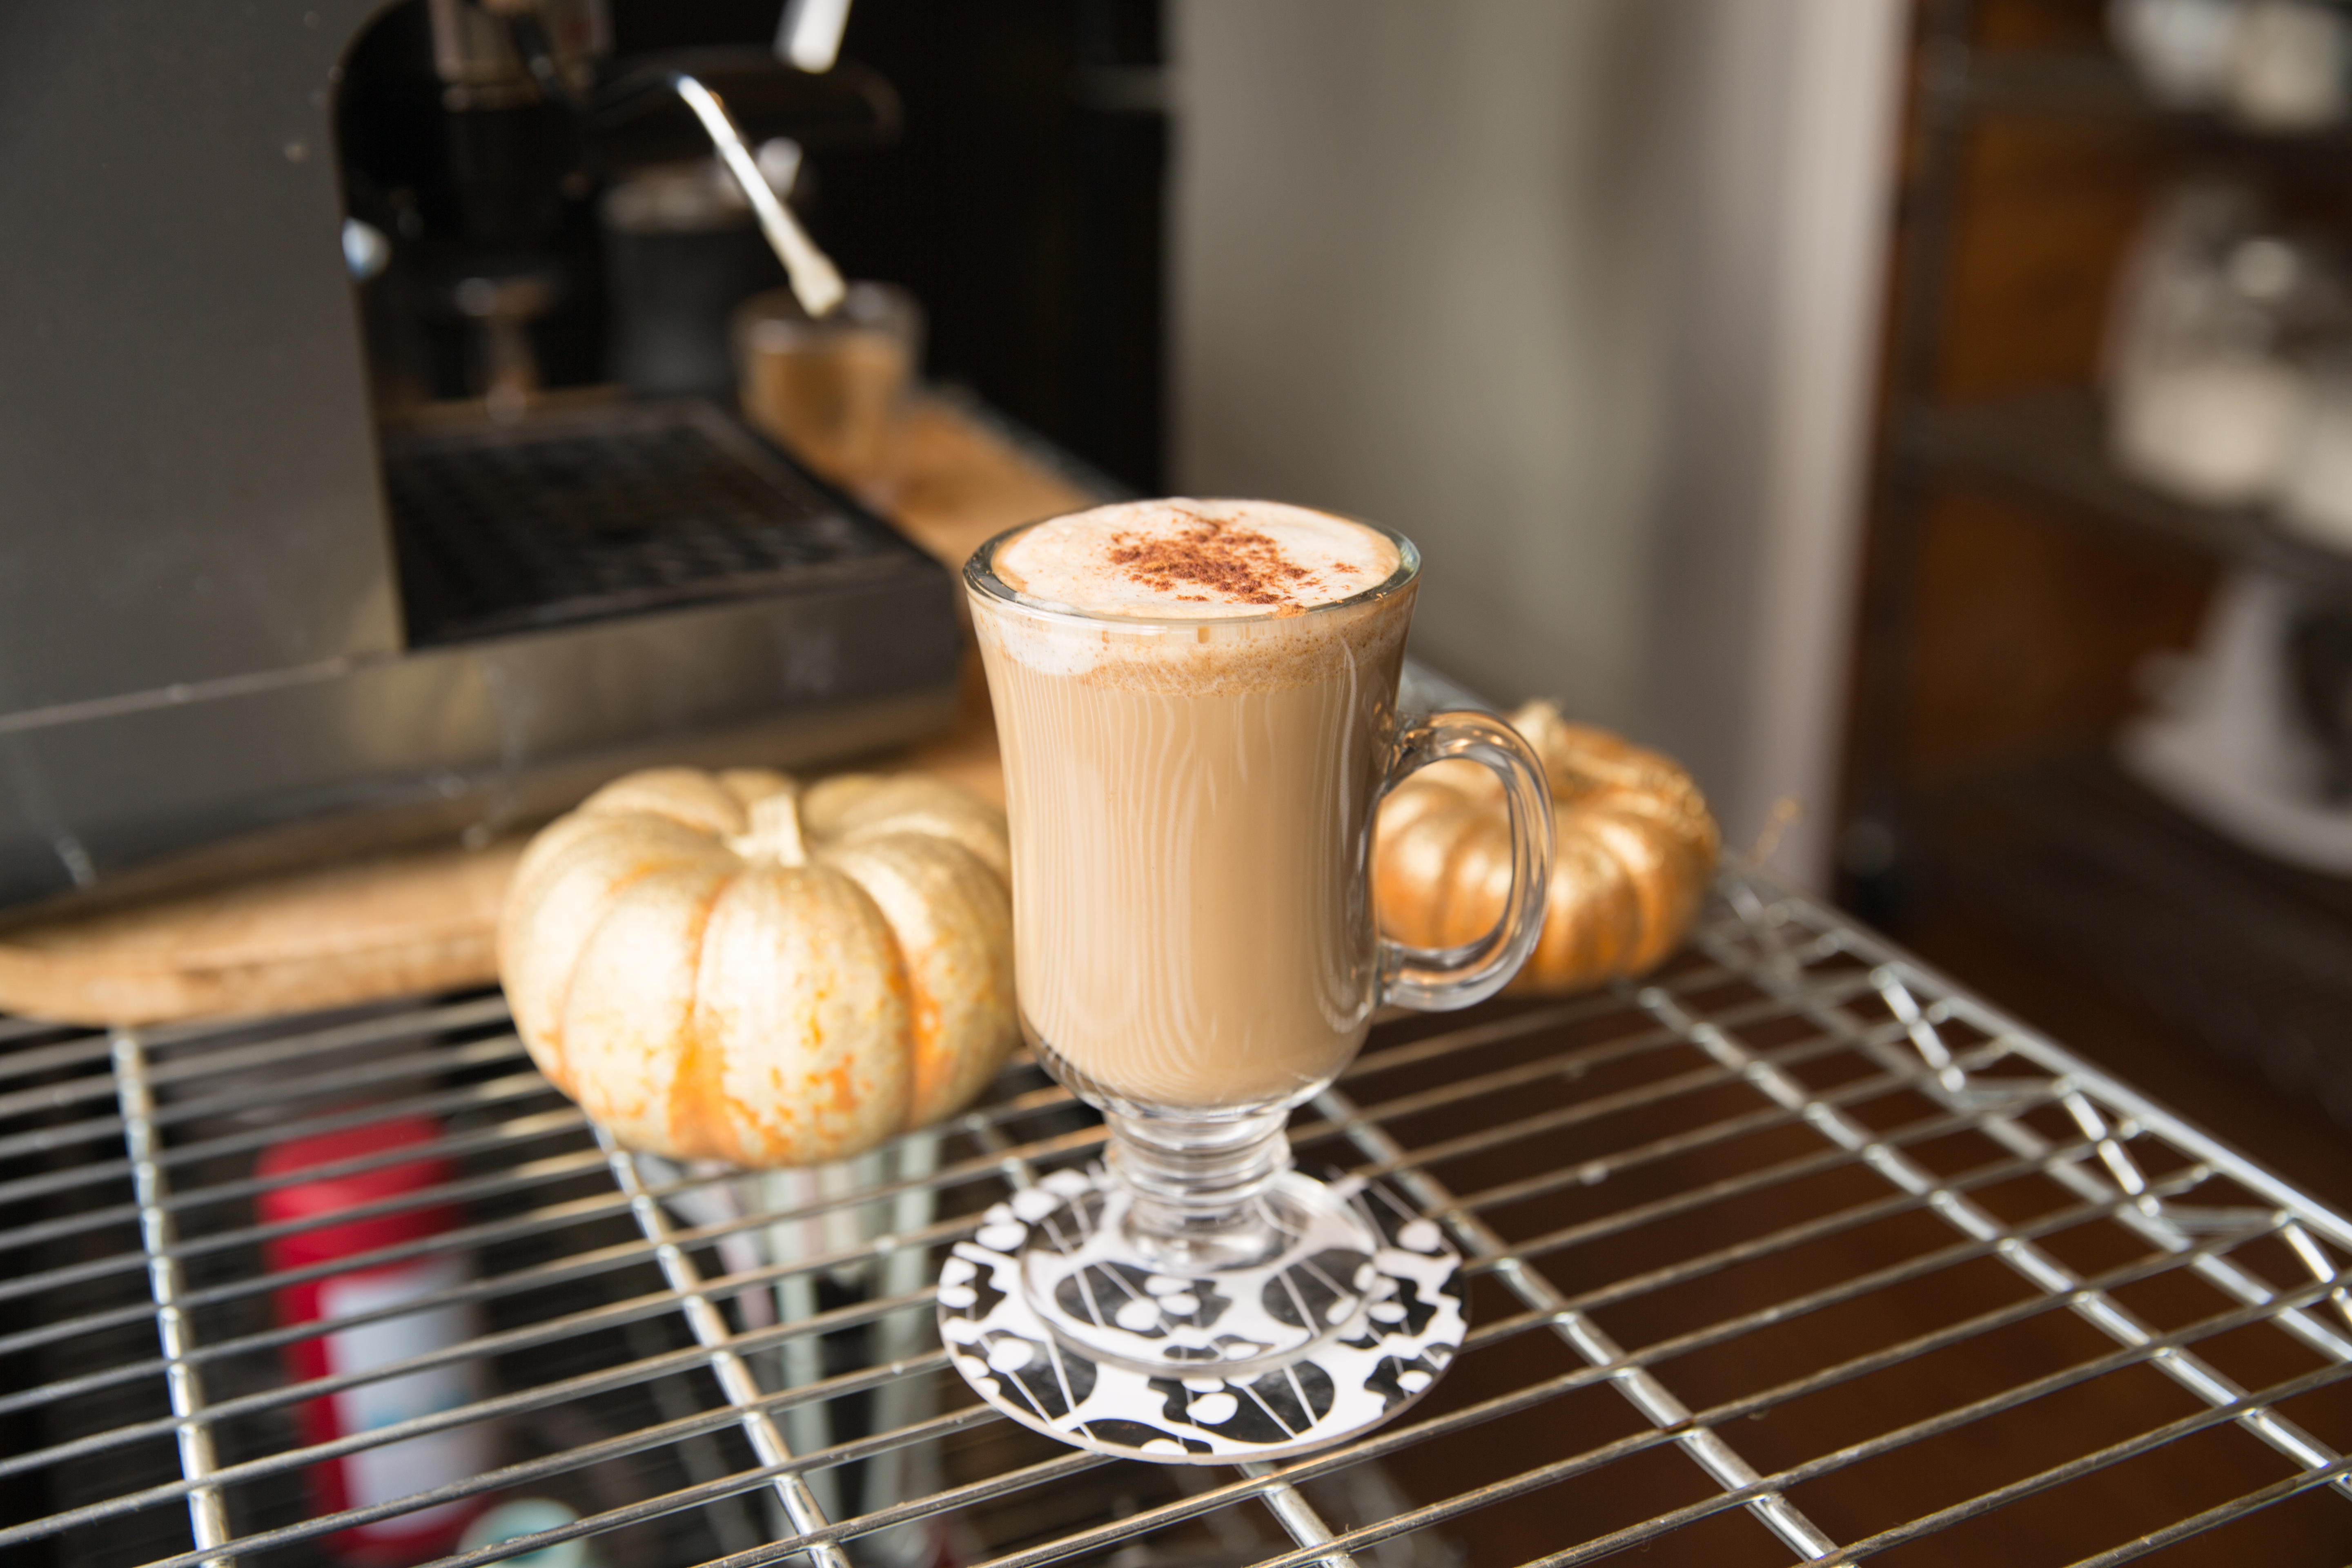 A freshly made pumpkin spice latte stands on a wire rack beside an espresso machine in a coffee shop.